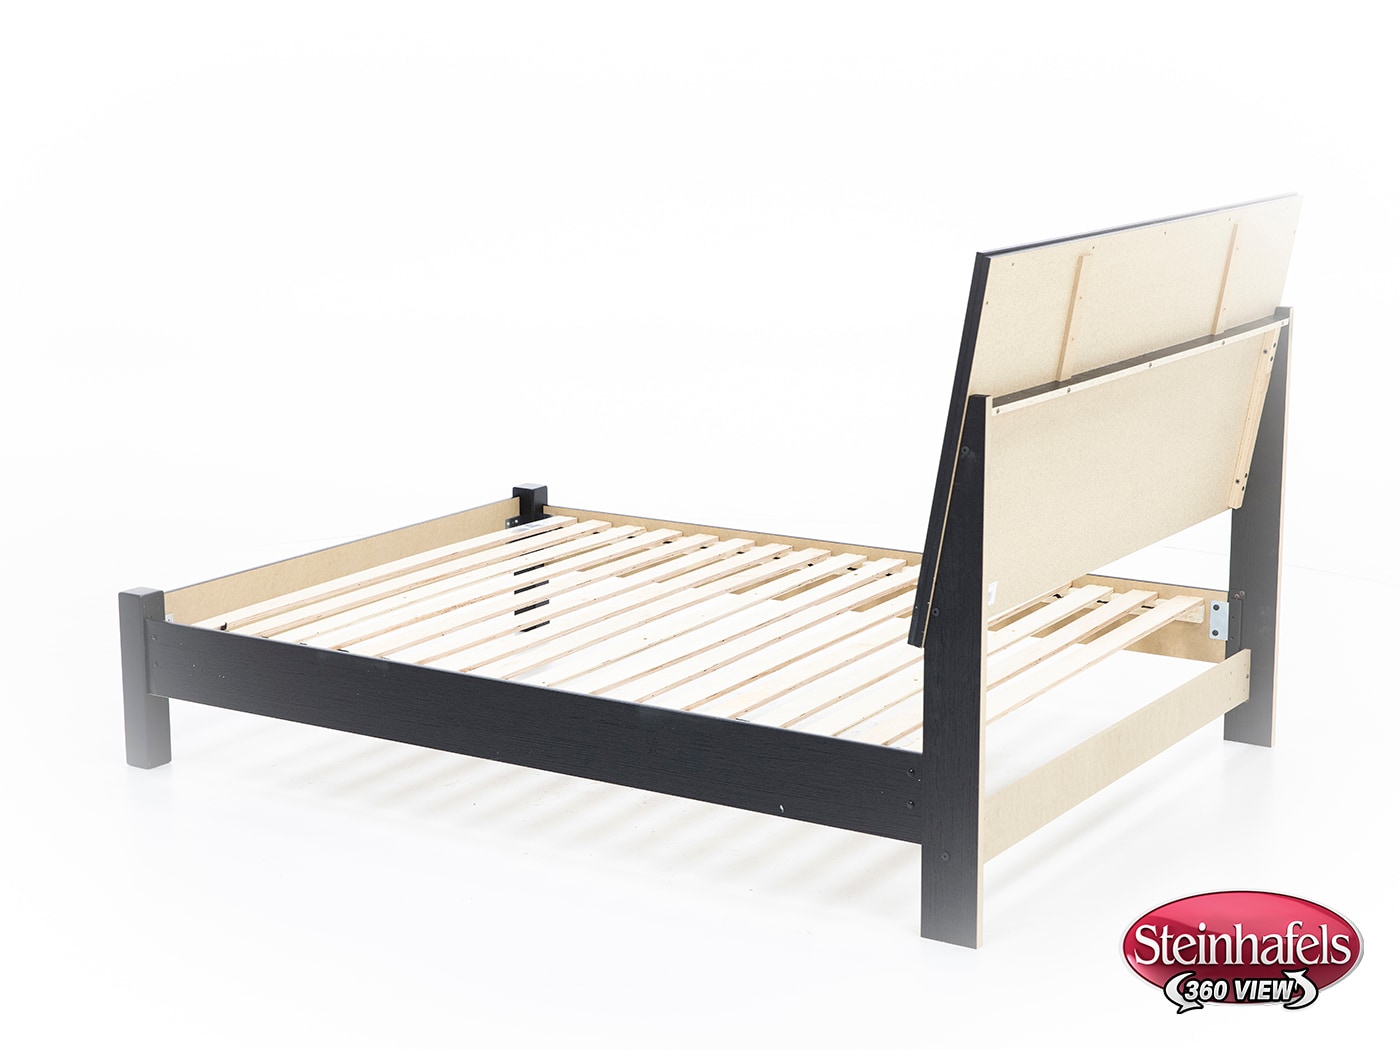 ashy black queen bed package  image pkg  